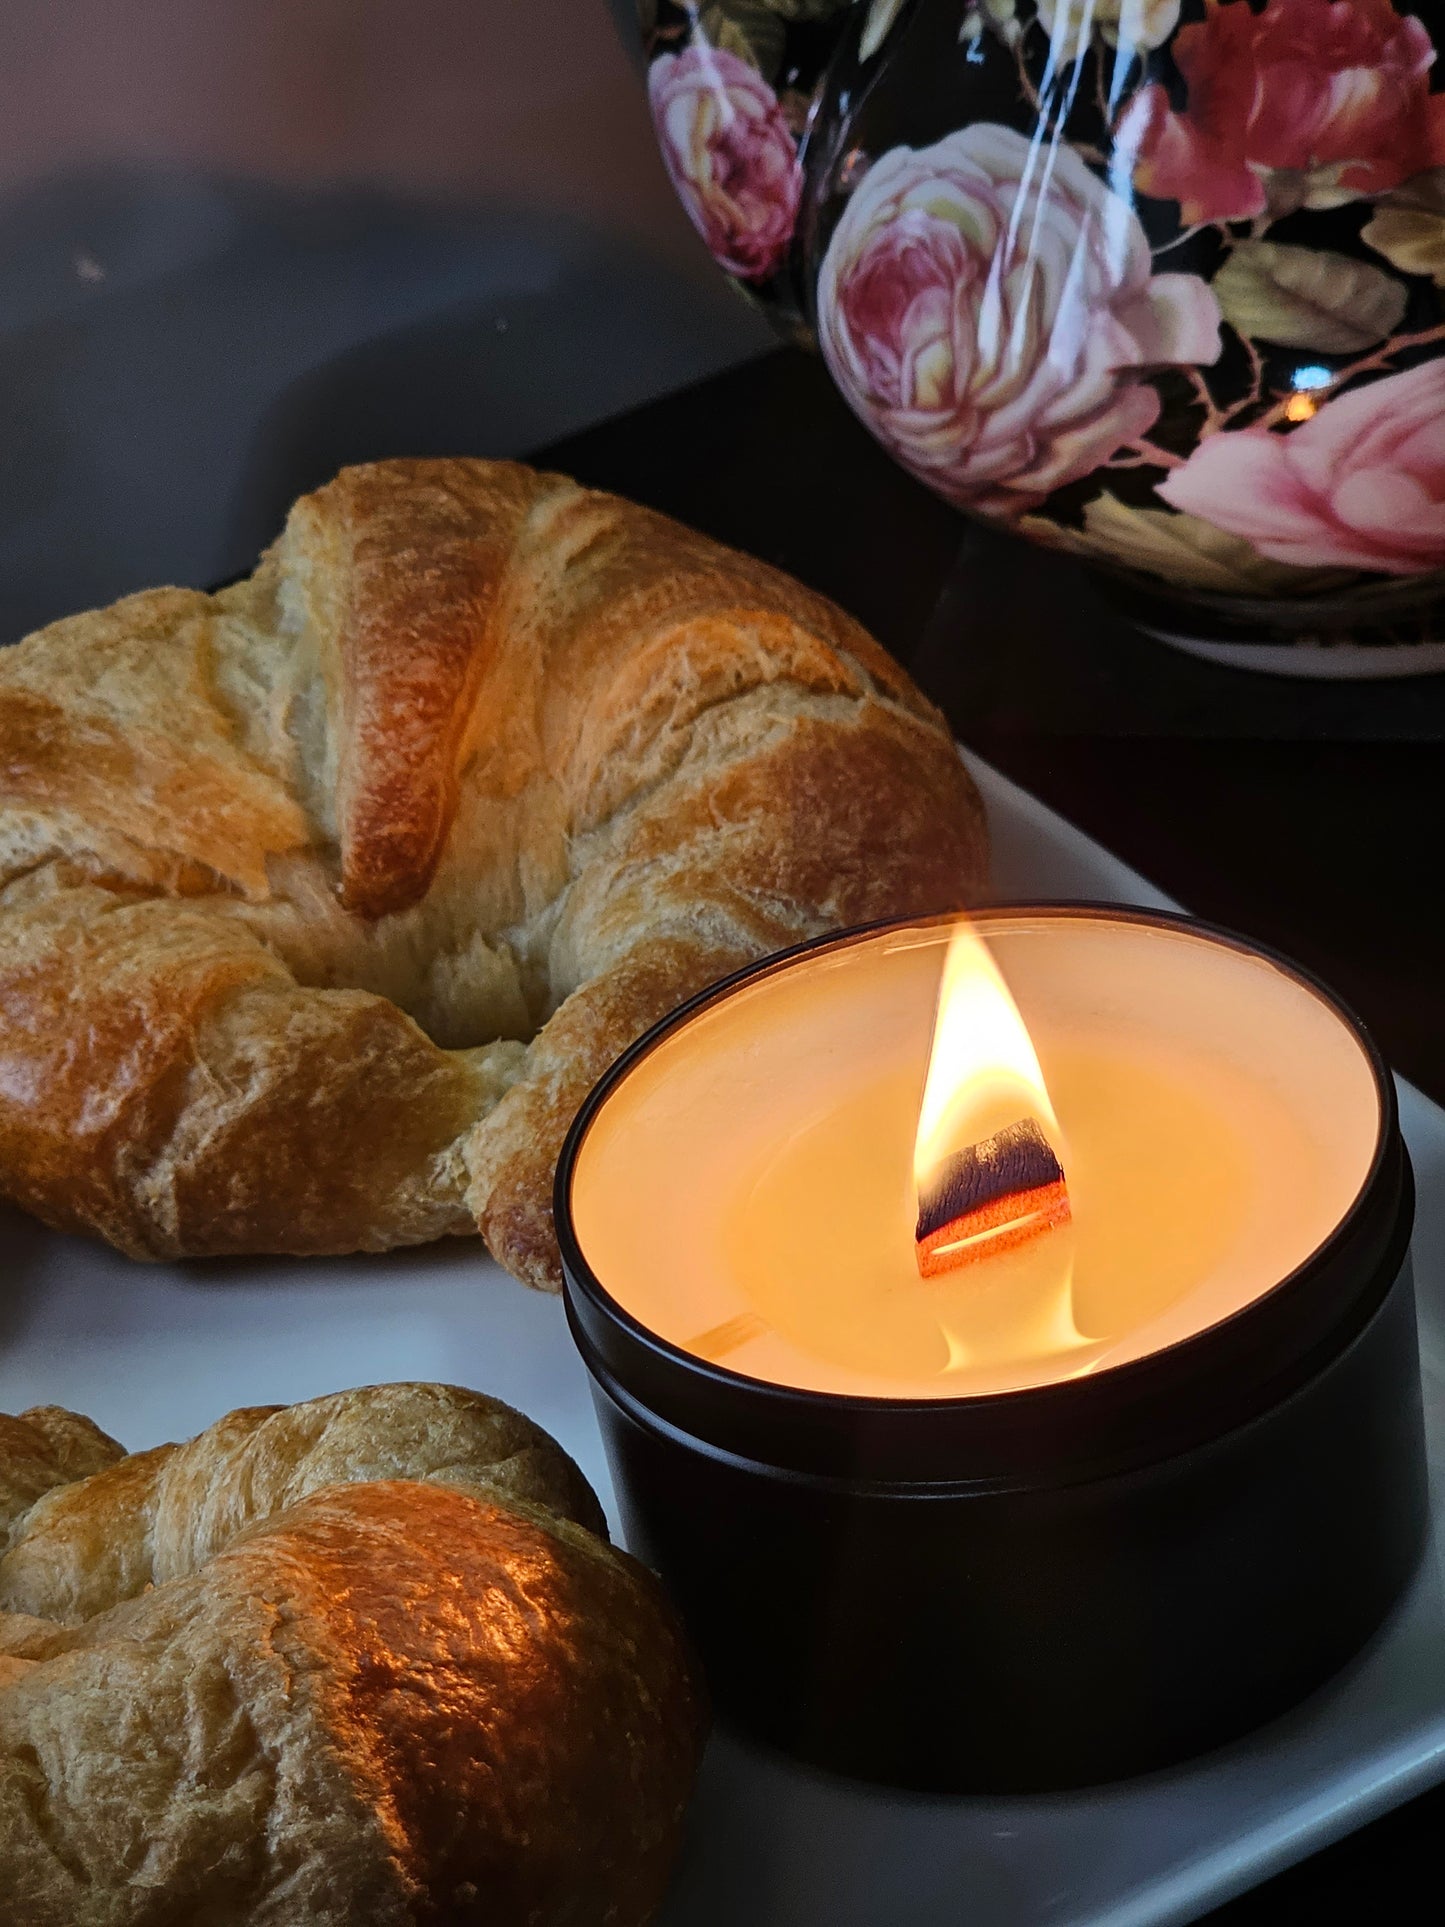 "BUTTERED CROISSANT" *BAM* SOY CANDLE